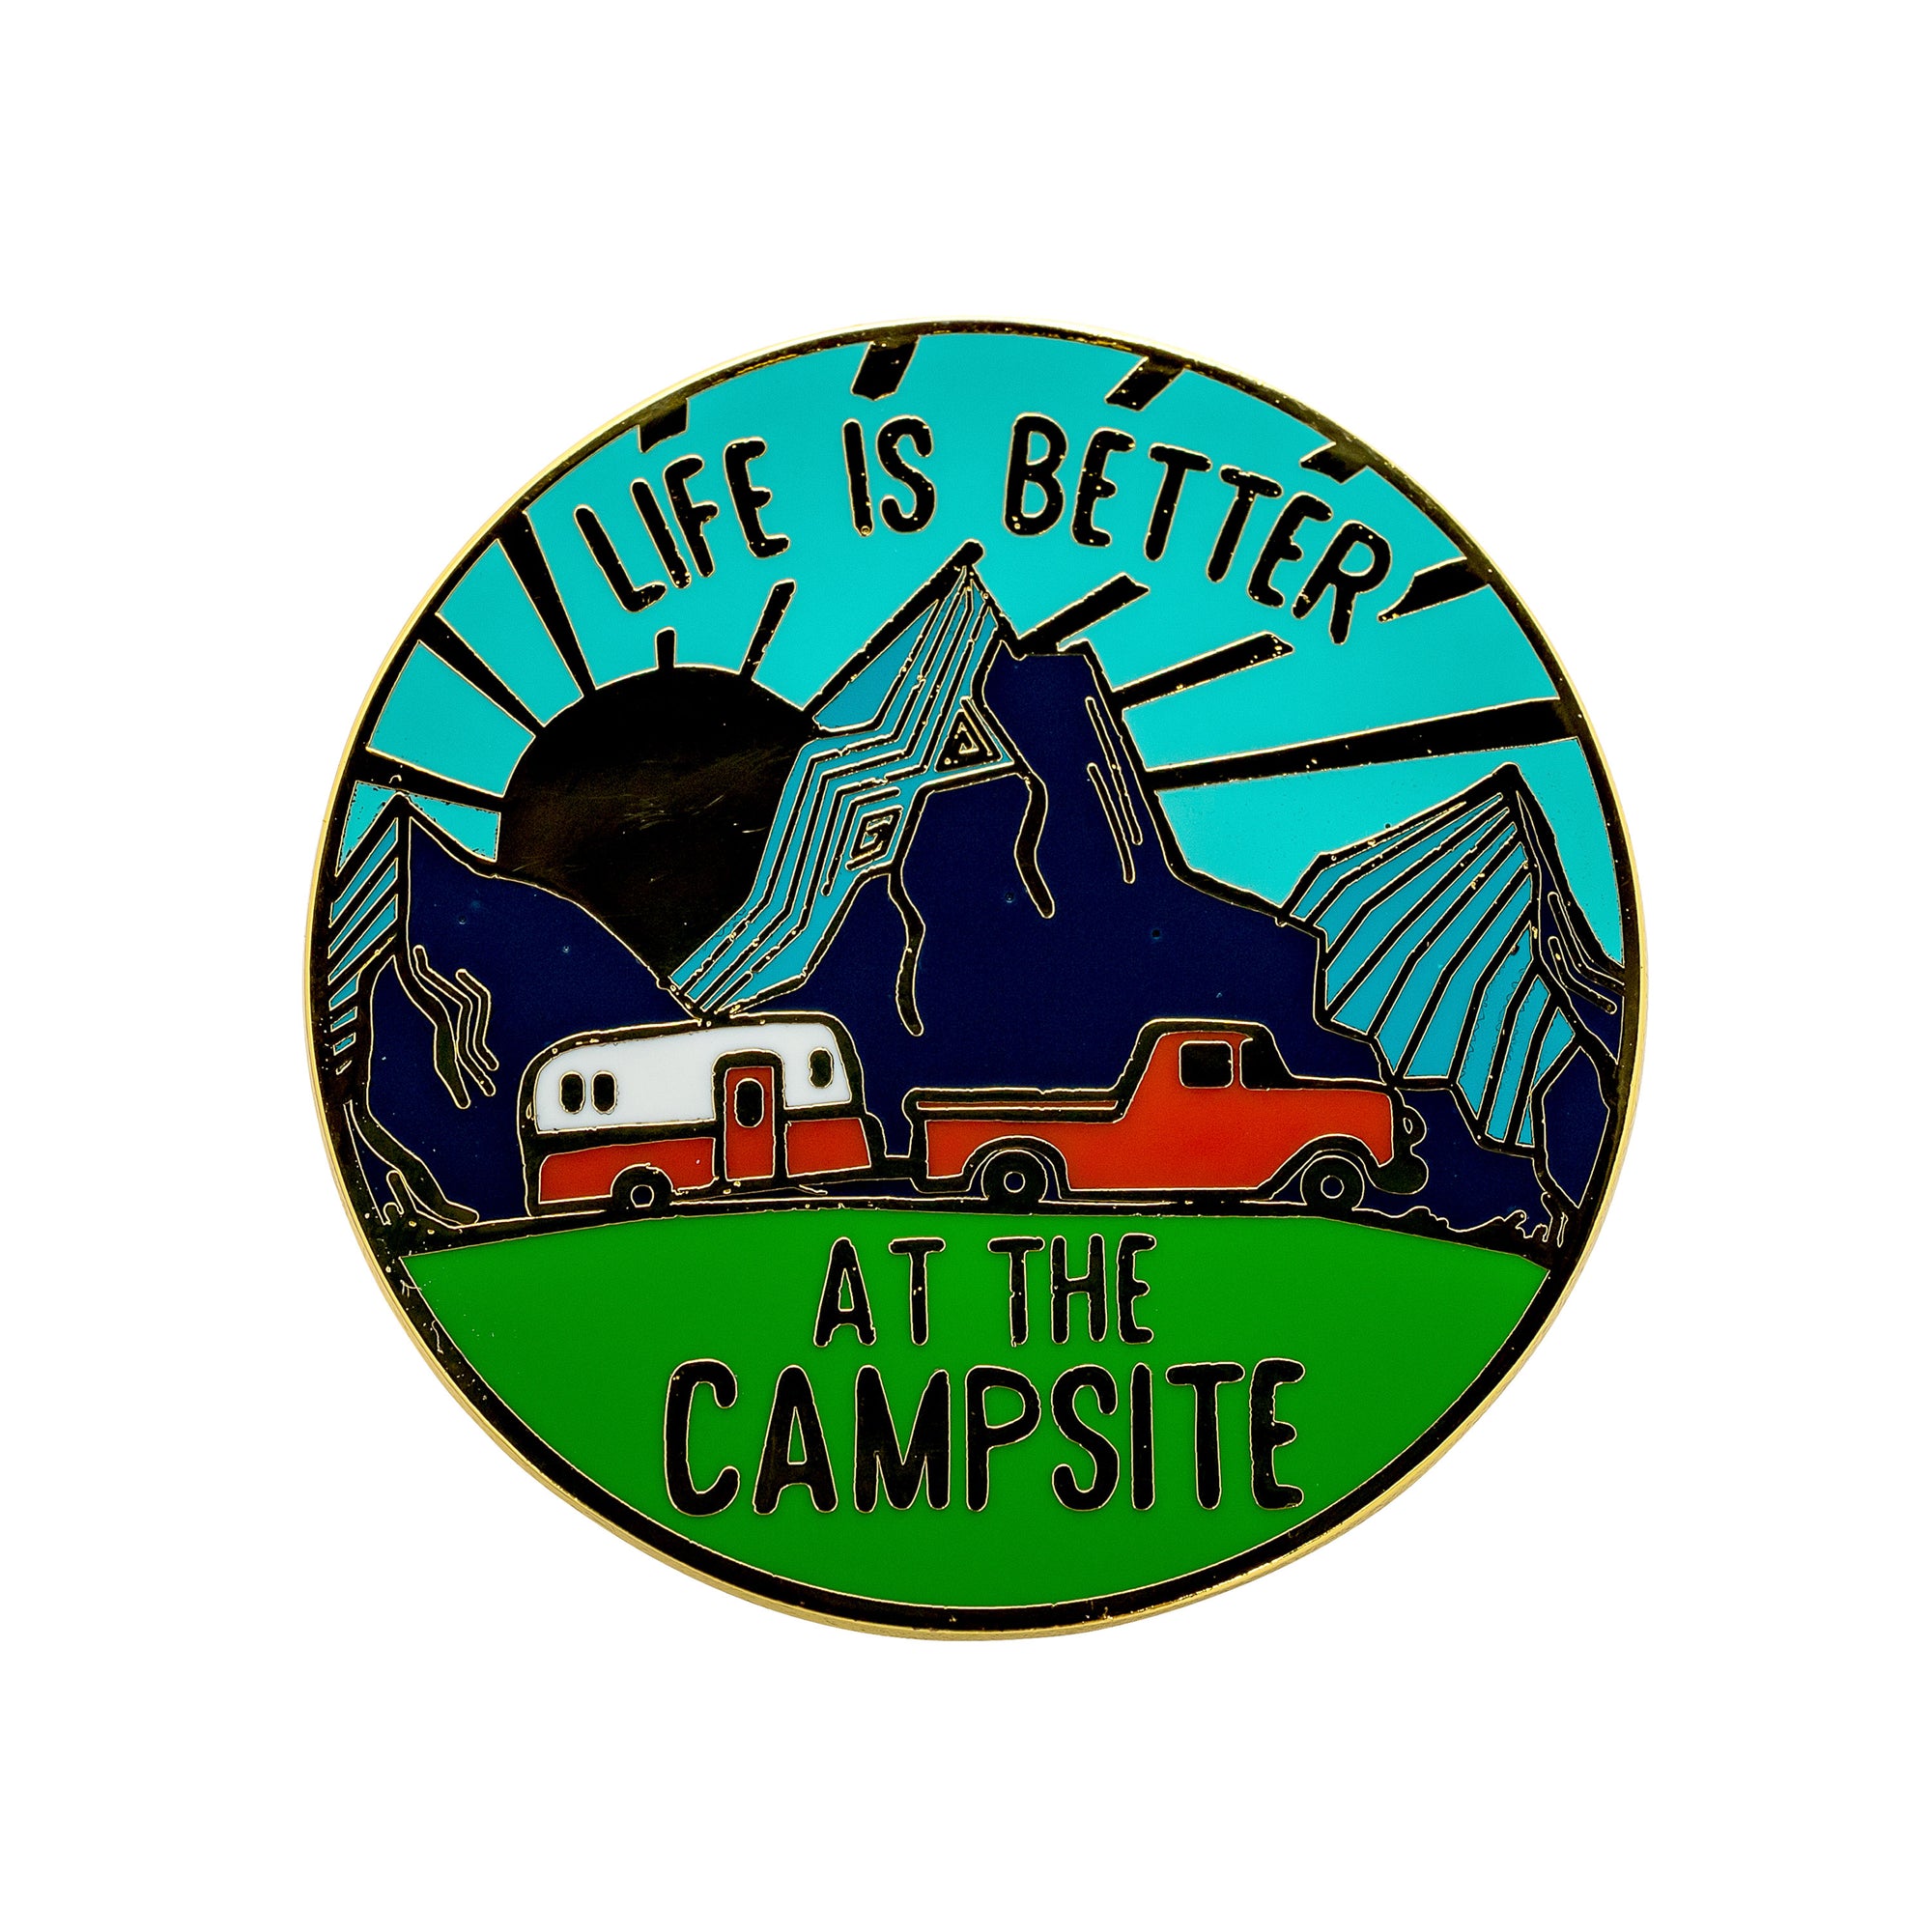 Camco 53265 "Life is Better at the Campsite" Enamel Pin - Sunrise